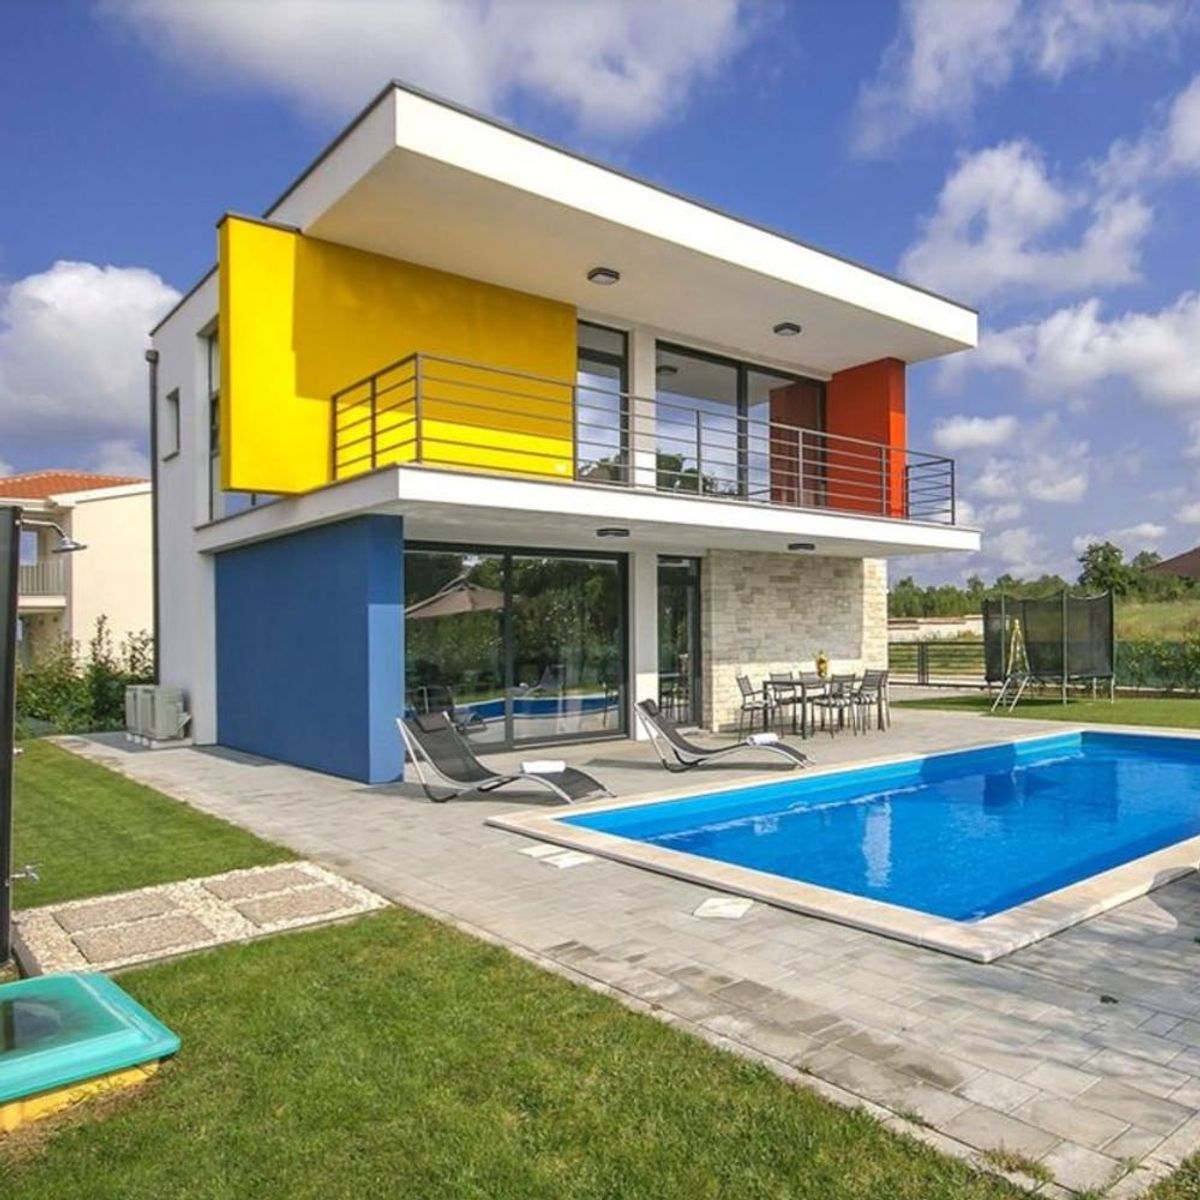 8 Colorful Houses Where You Can Live Out Your Rainbow Dreams